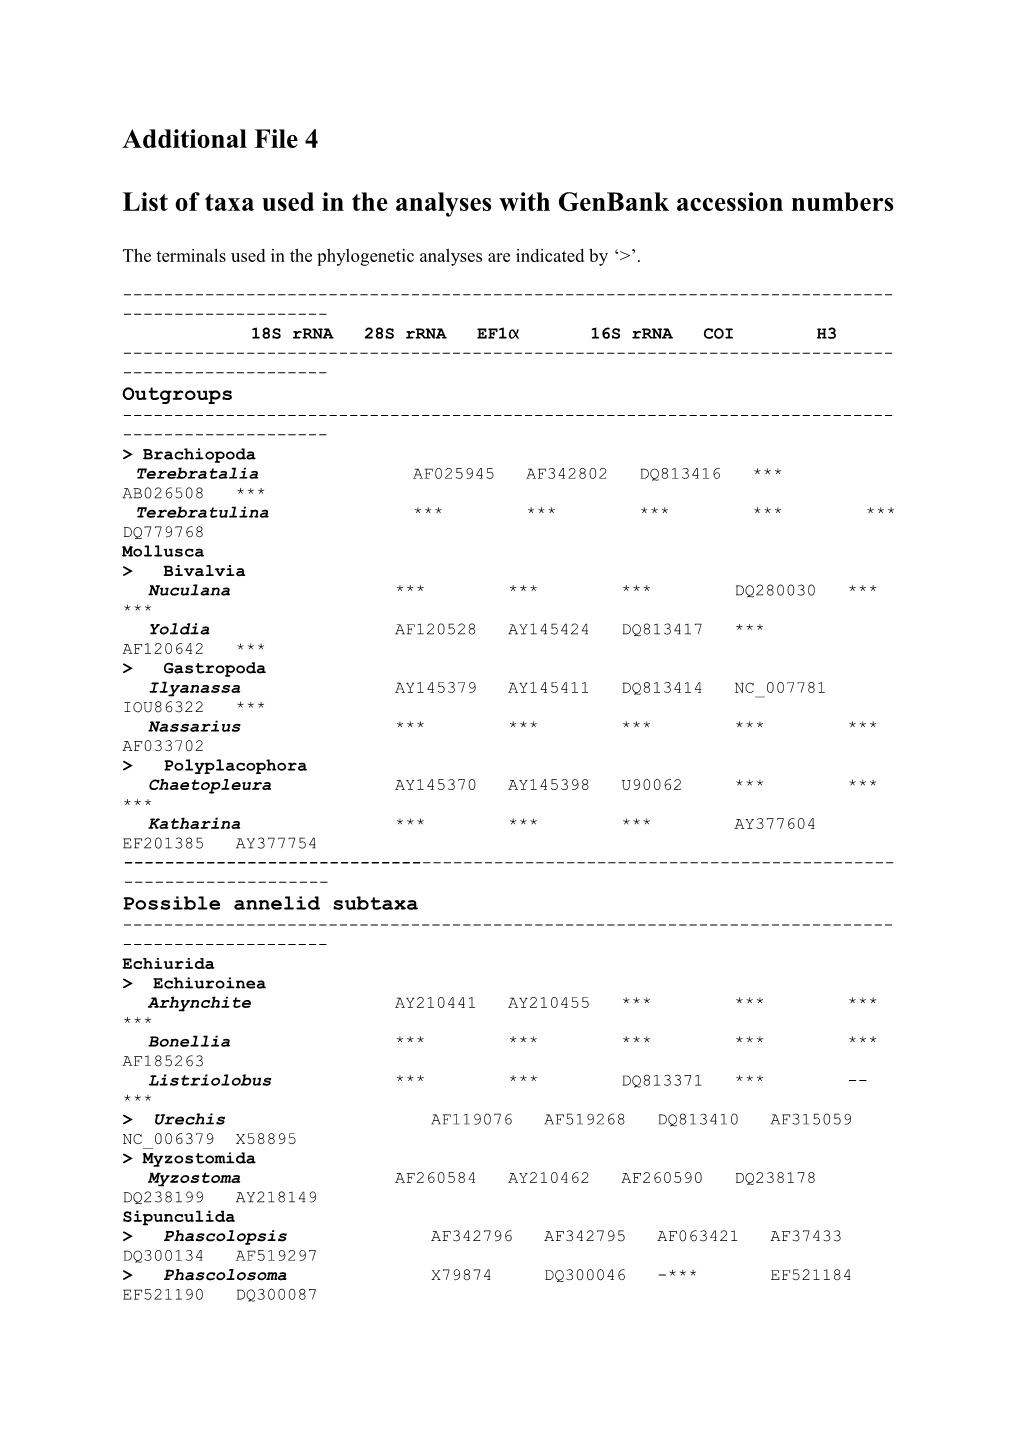 List of Taxa Used in the Analyses with Genbank Accession Numbers